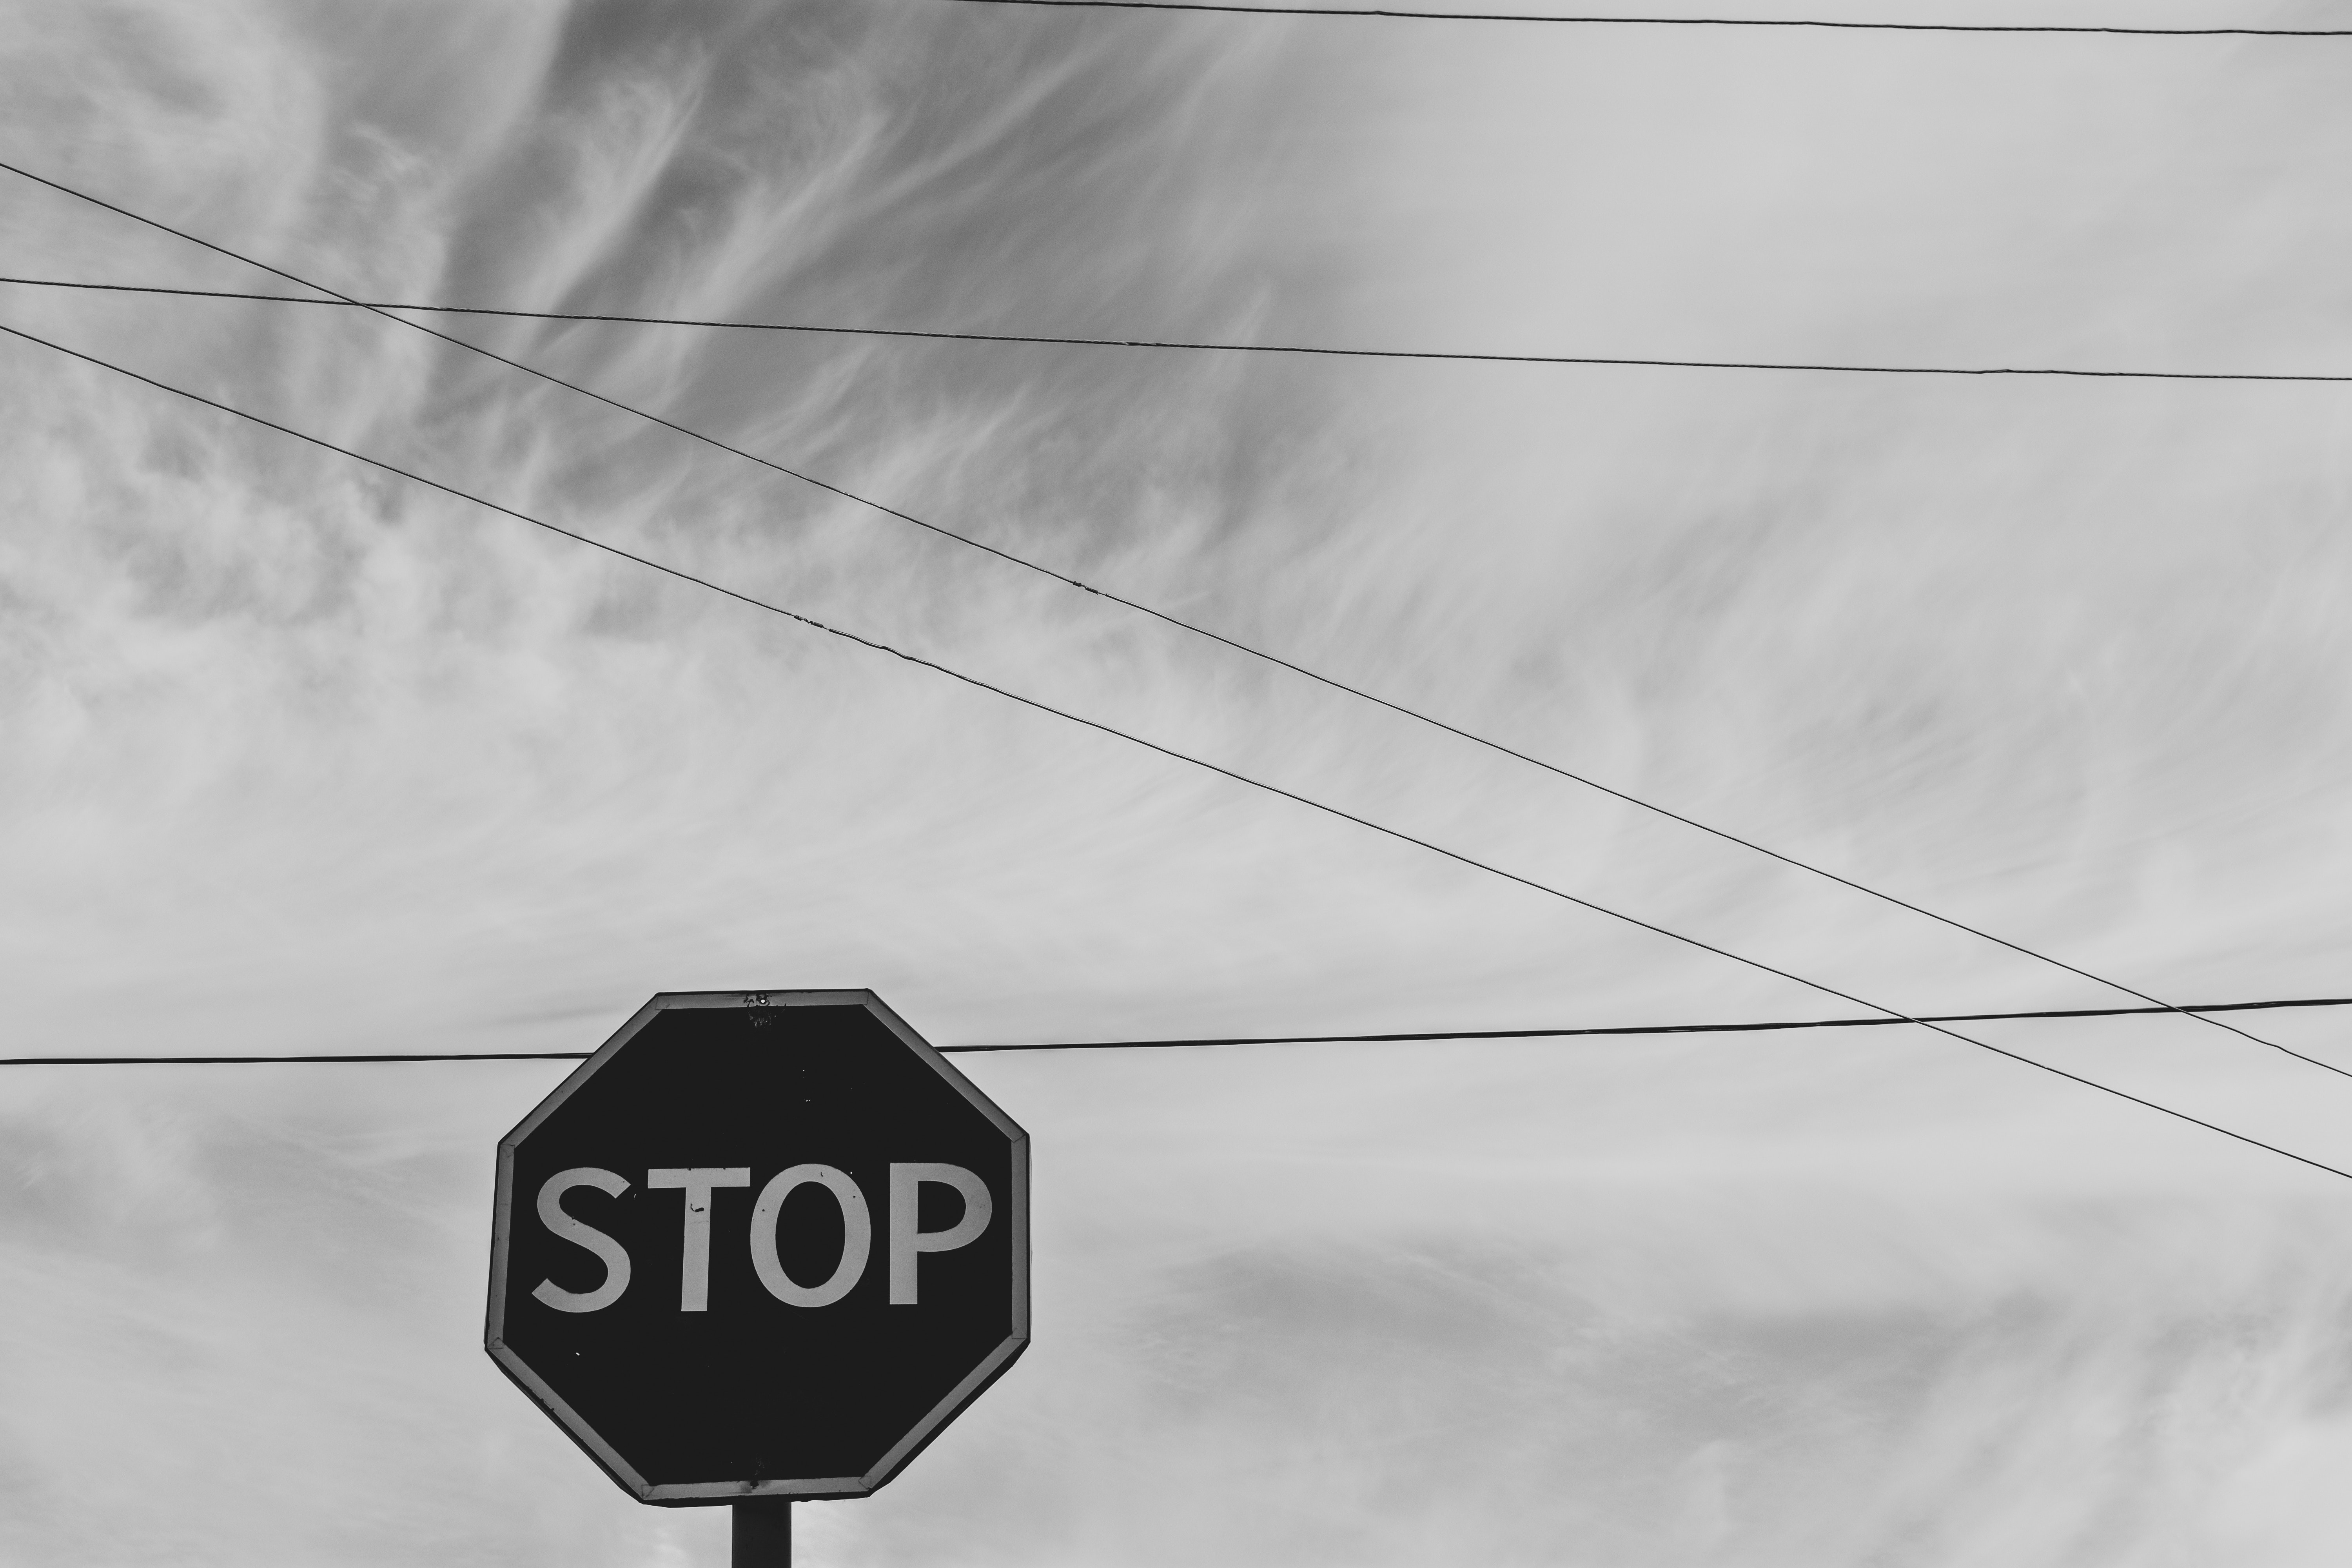 wires, stop, sky, words, bw, chb, sign, wire UHD